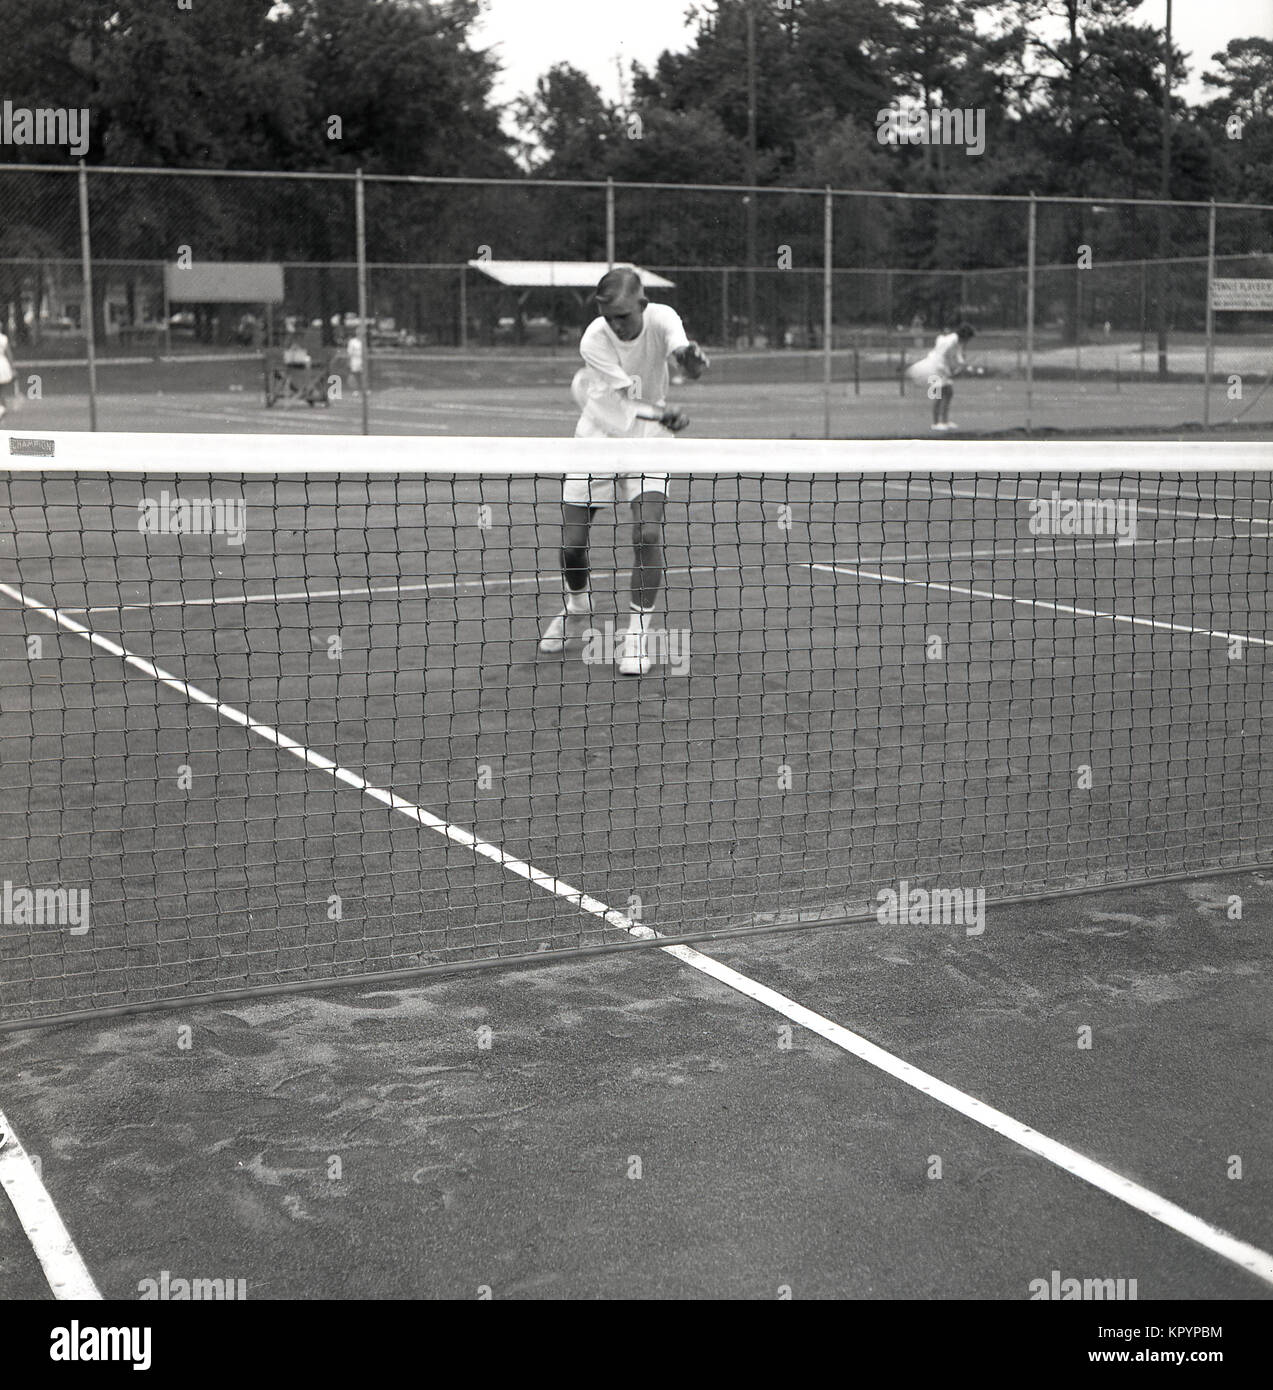 1960s, historical, picture shows a young adult tennis player at the net concentrating on volleying a ball, USA. Stock Photo